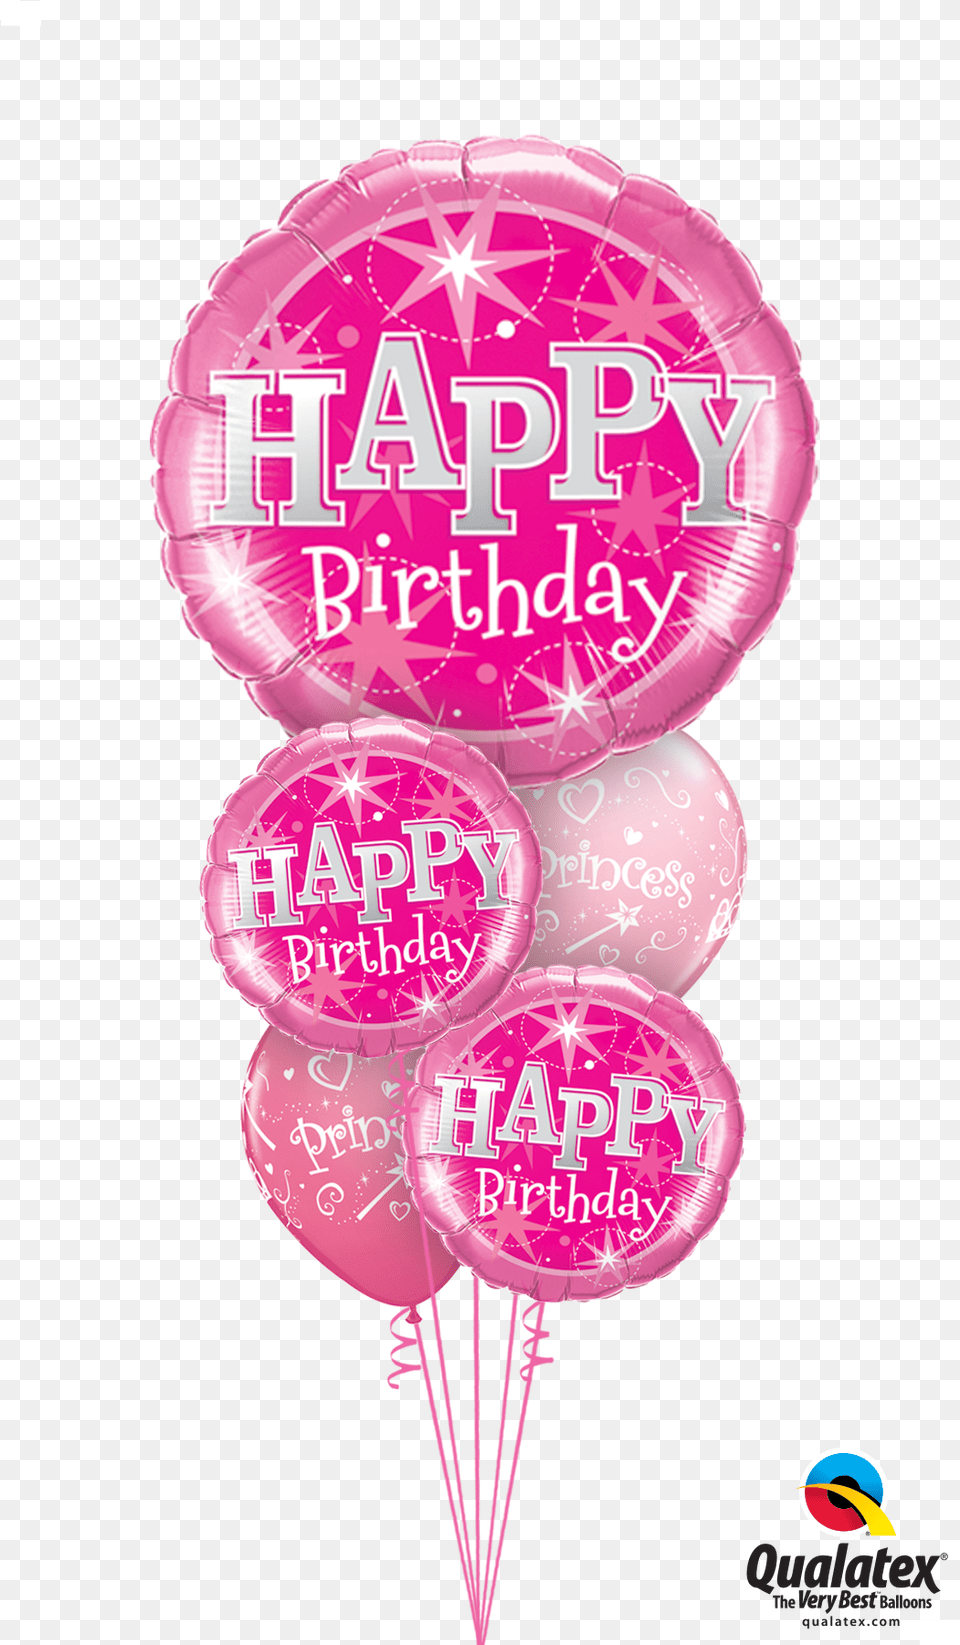 Haopy Birthday Pink Bouquet Pink Happy Birthday Balloon Bouquet Free Transparent Png